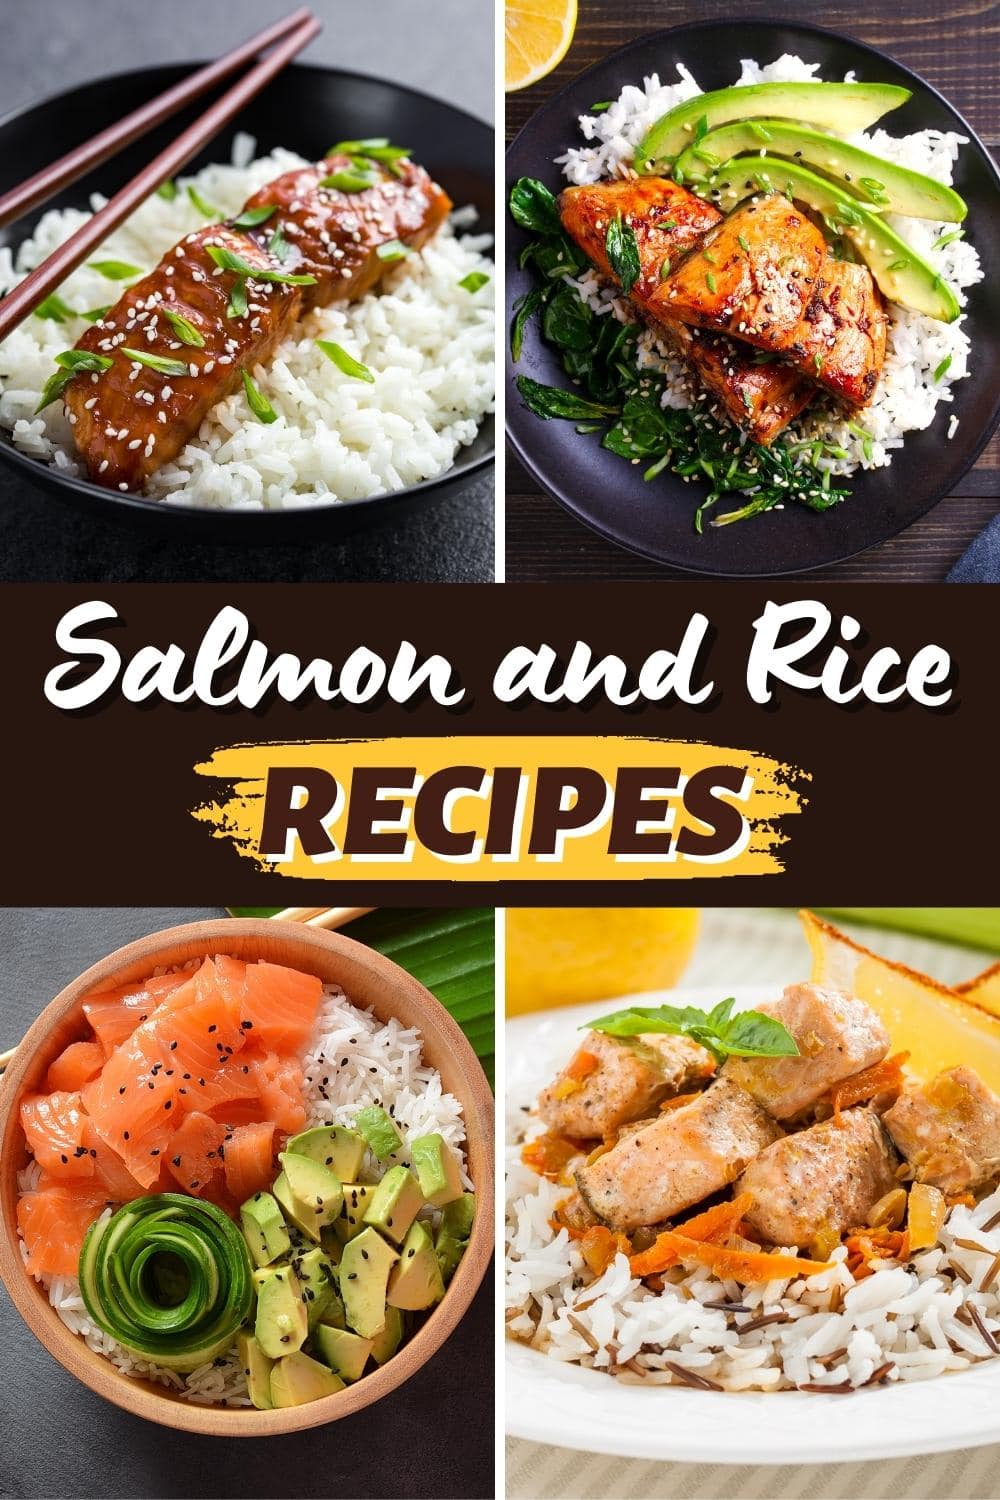 20 Easy Salmon and Rice Recipes We Can’t Resist - Insanely Good